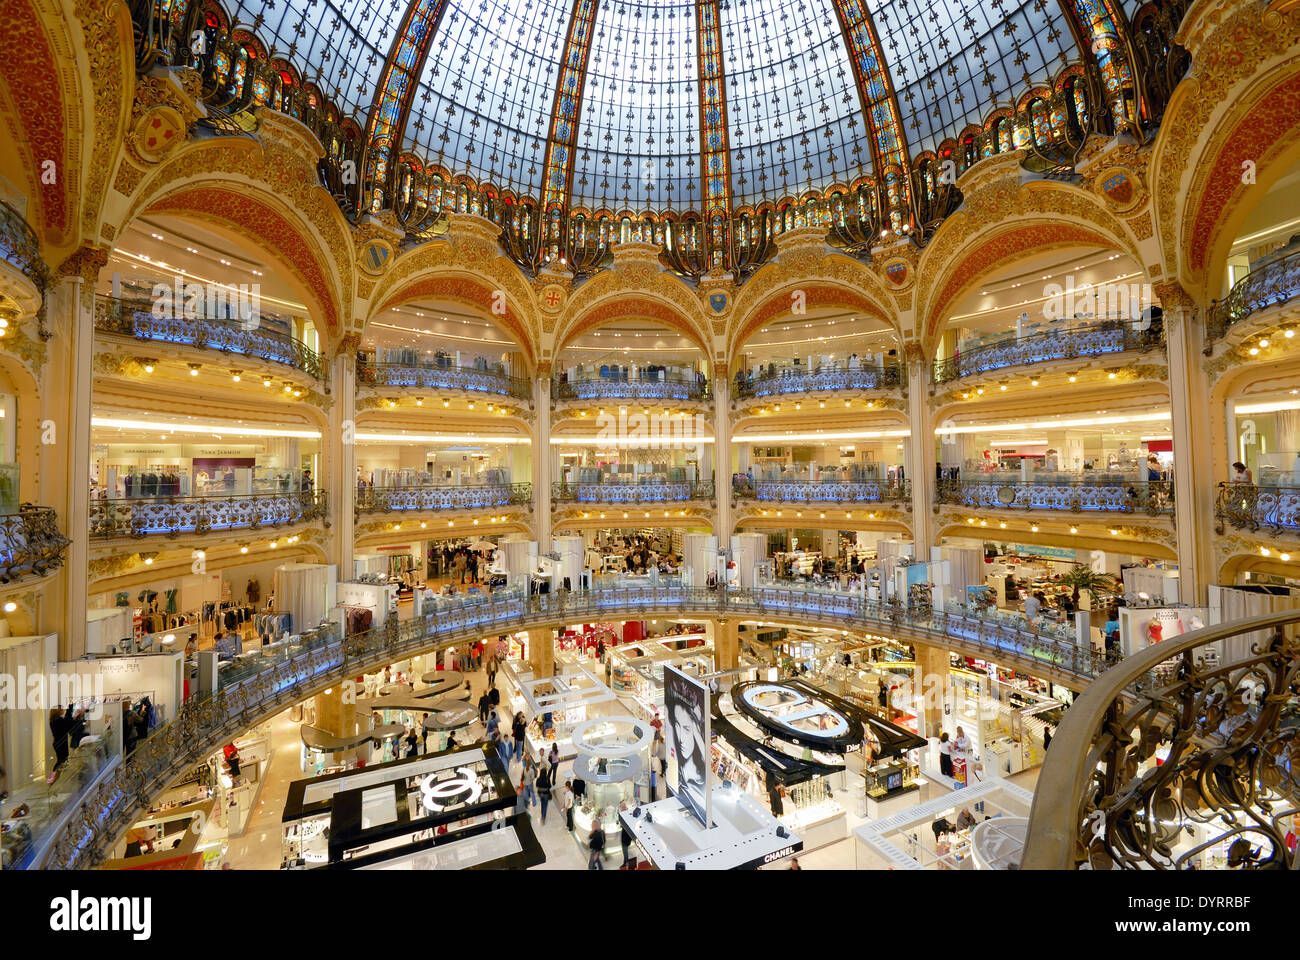 Galeries Lafayette, shopping mall, Paris, France Stock Photo, Royalty Free Image: 68750067 - Alamy